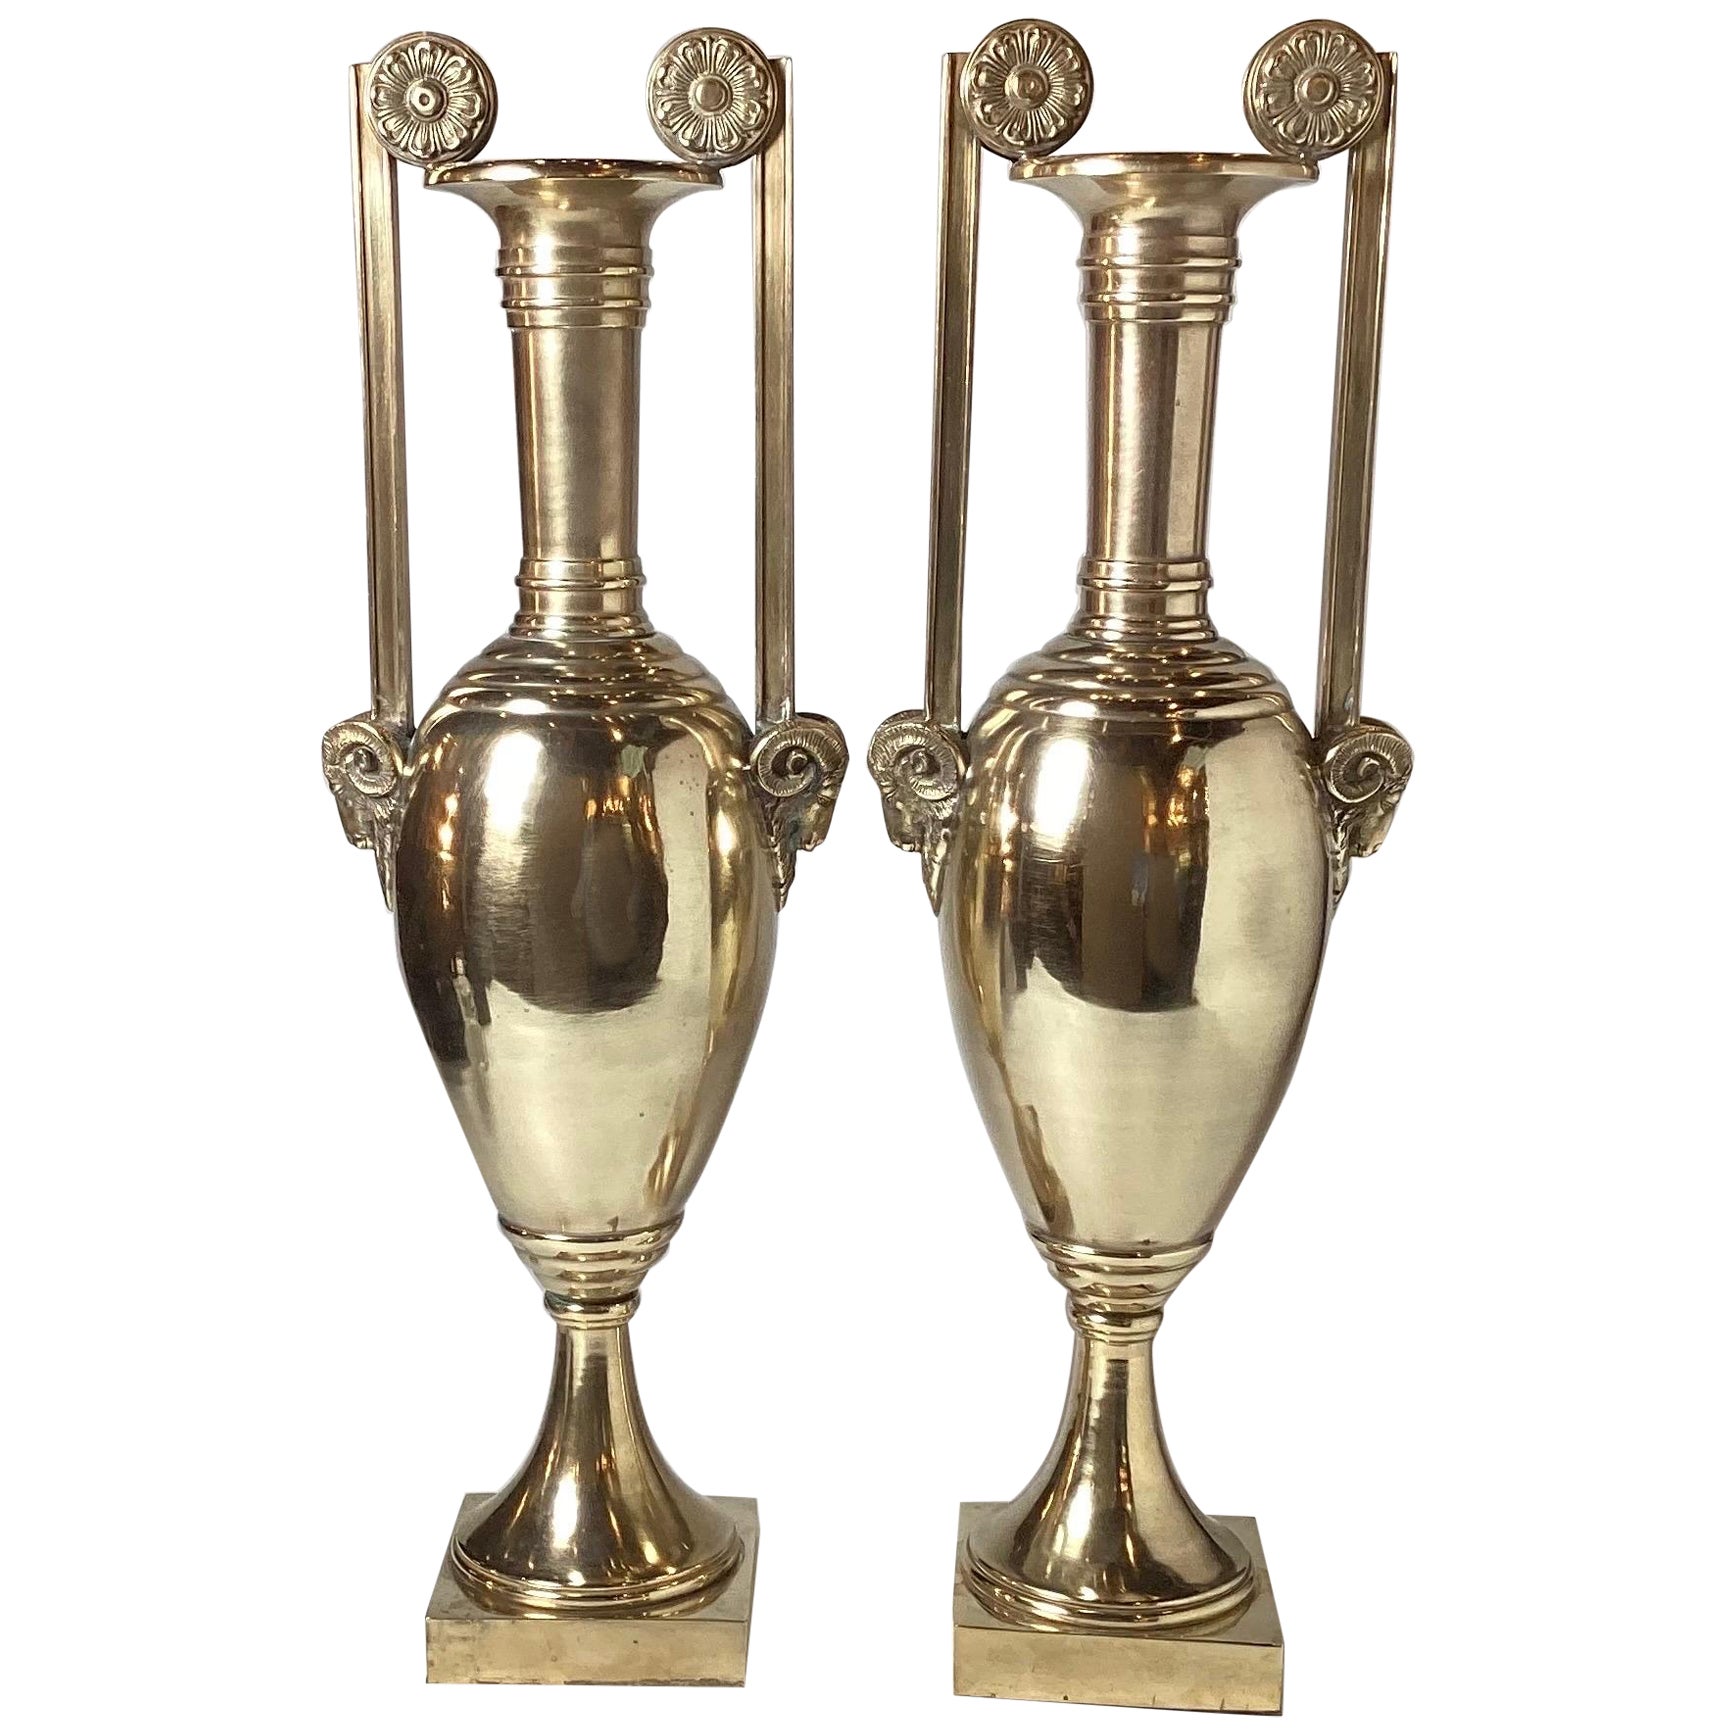 Tall Pair of Cast Polished Brass Neoclassical Urns